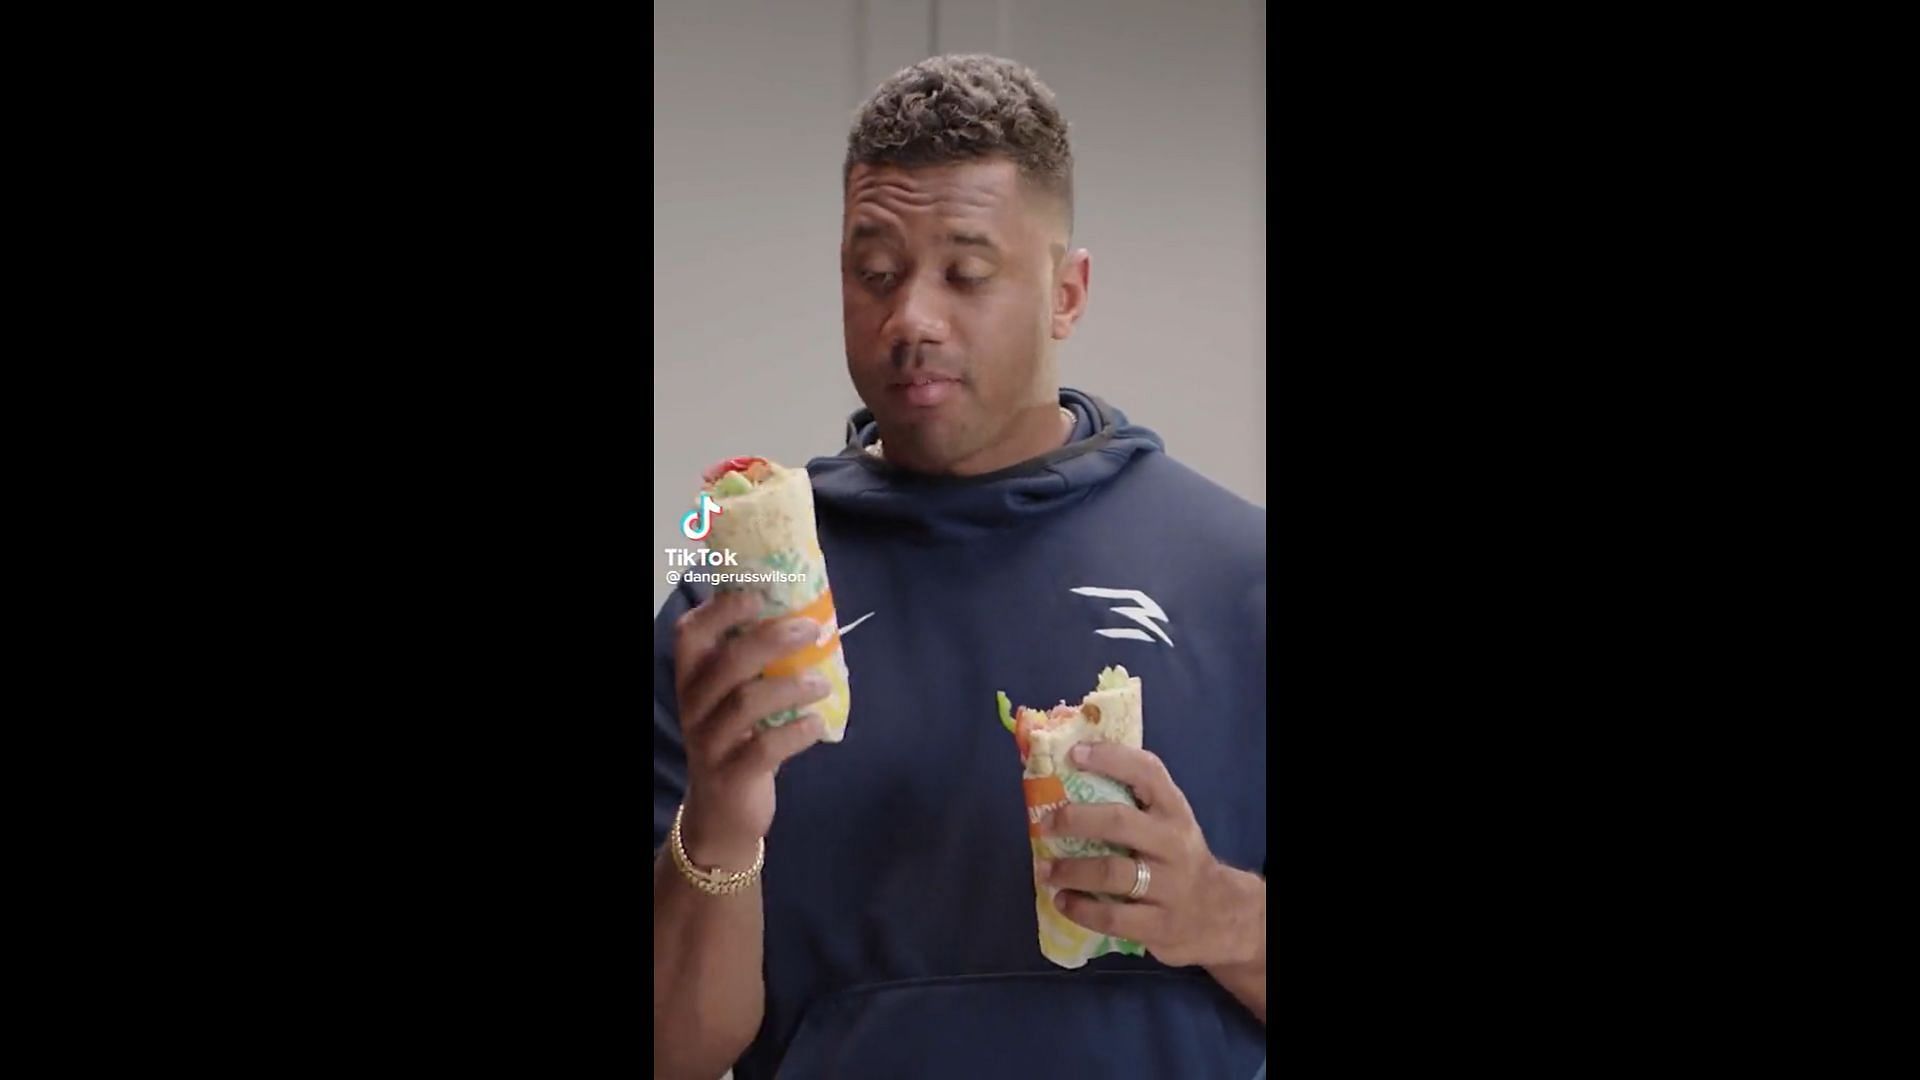 Wilson during his Subway commercial. Photo credit Russell Wilson/TikTok